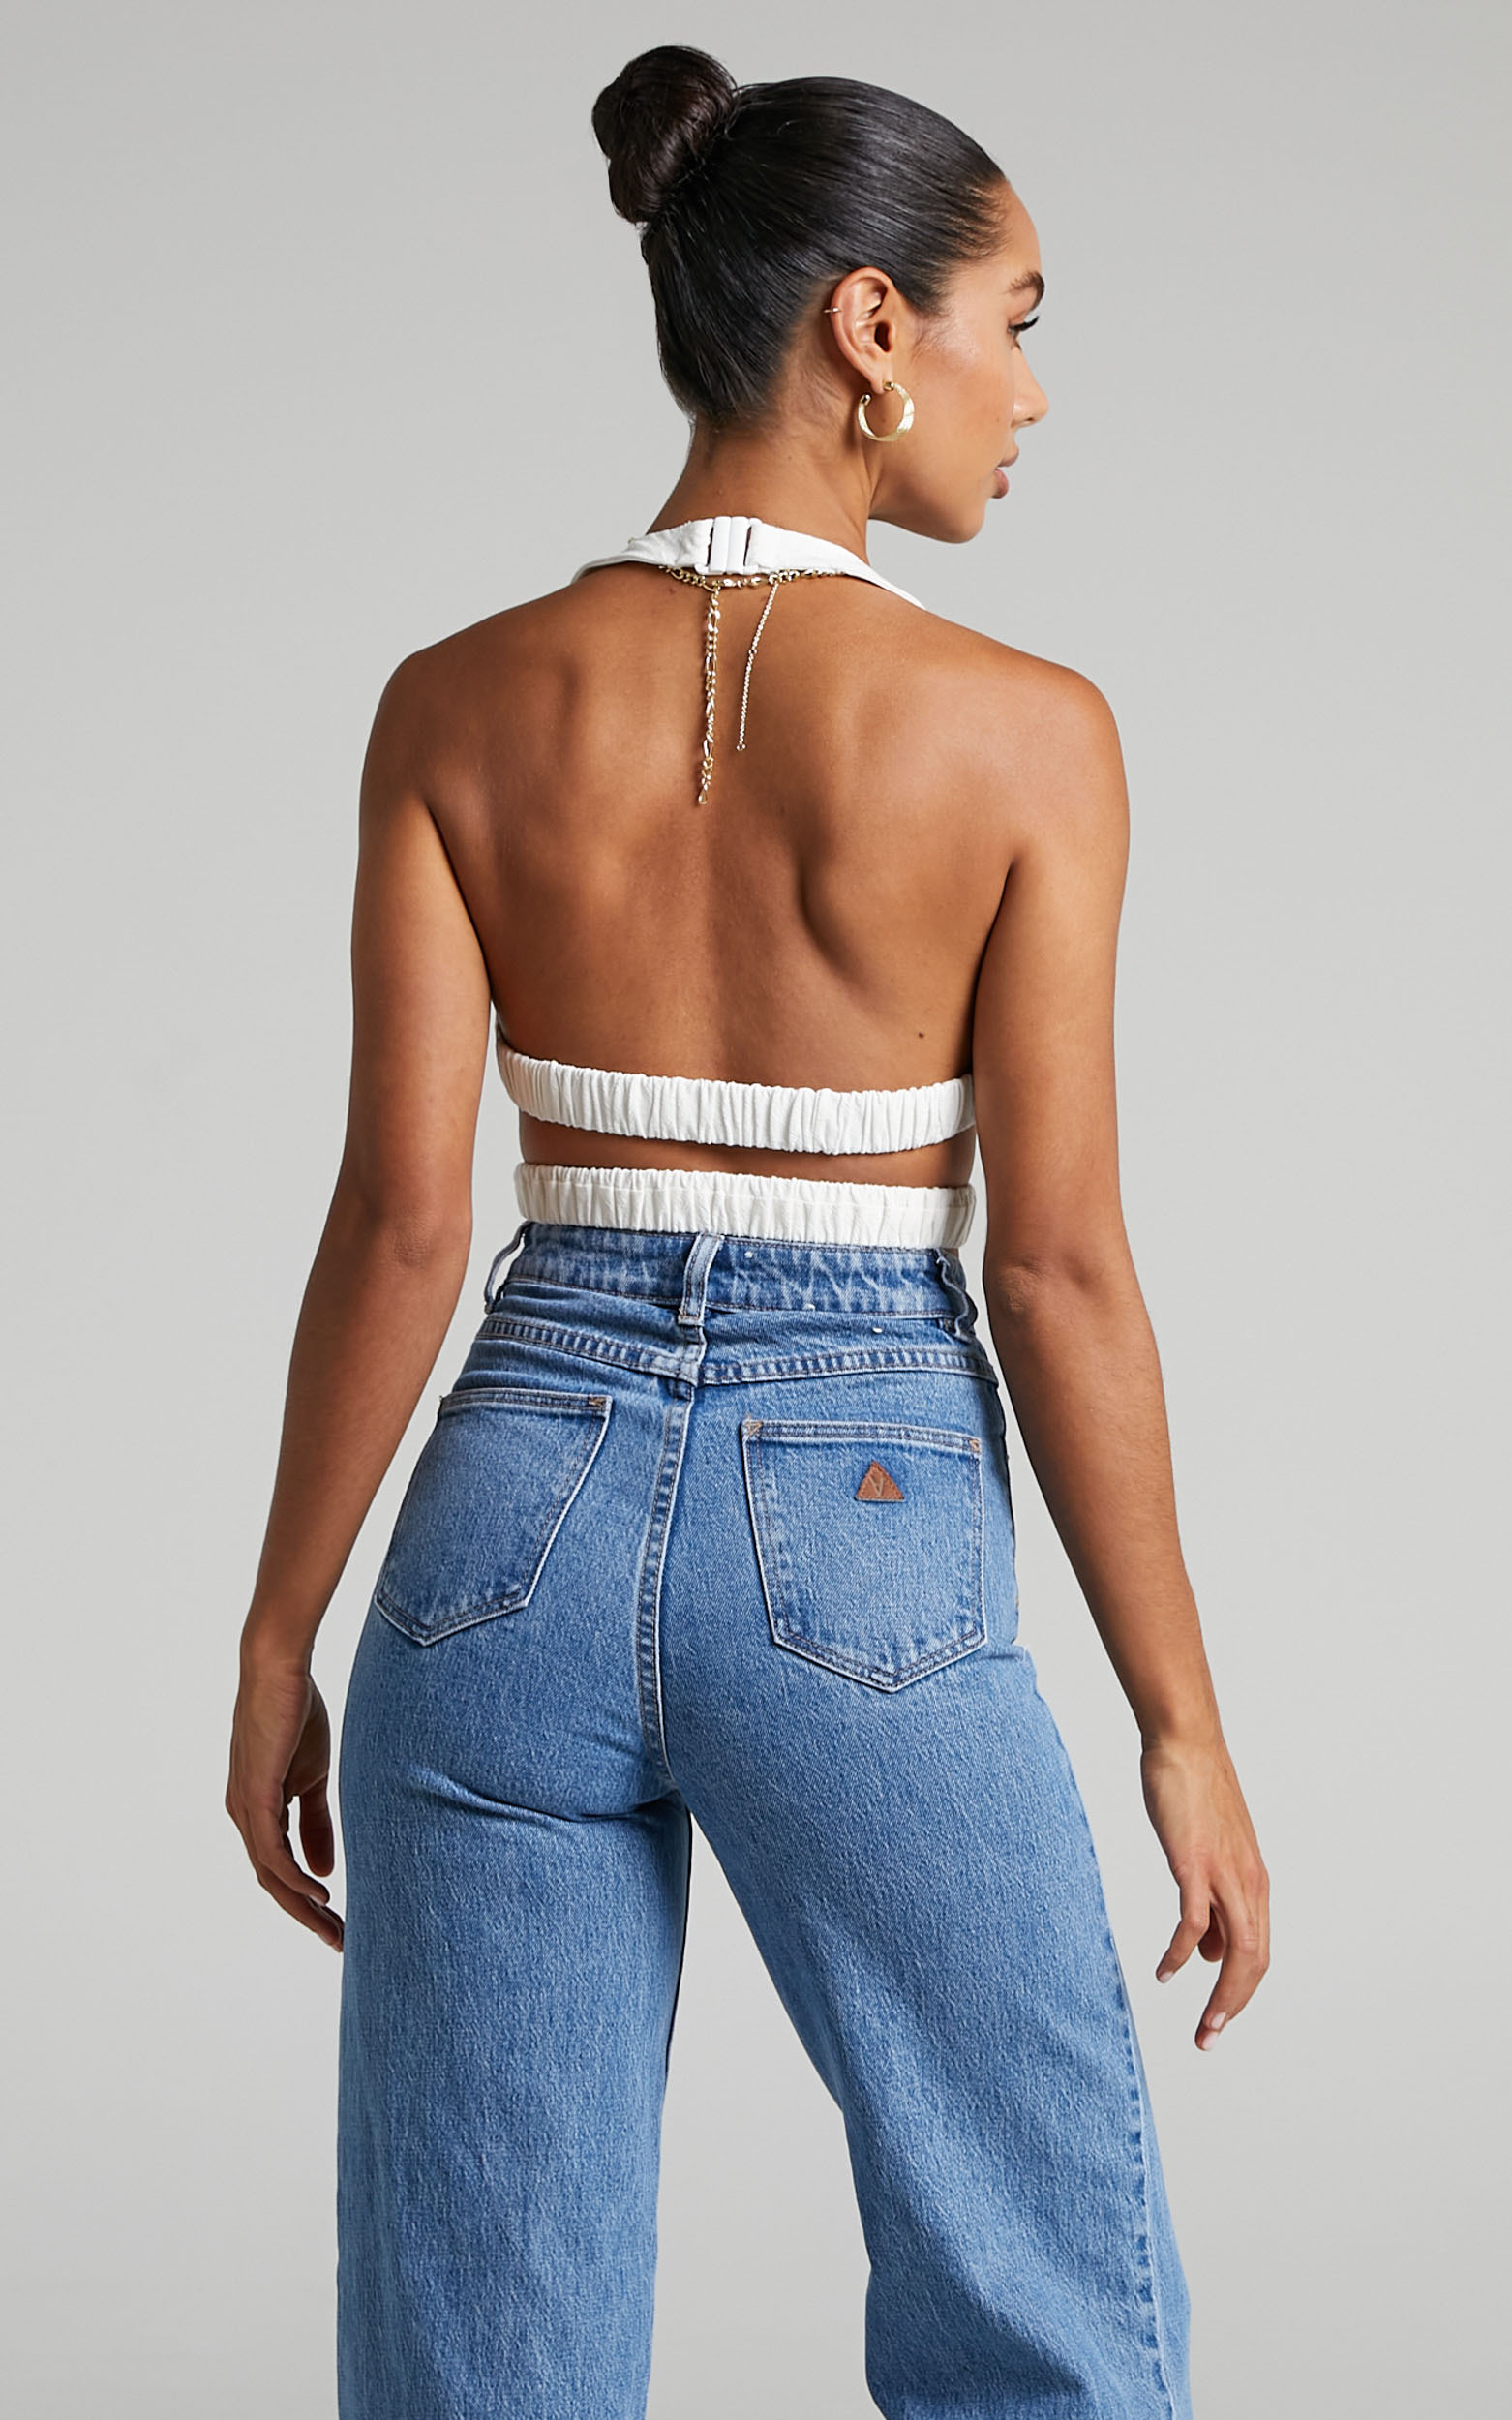 Rubelita Cut Out Halter Neck Crop Top in Off White - 06, WHT1, hi-res image number null